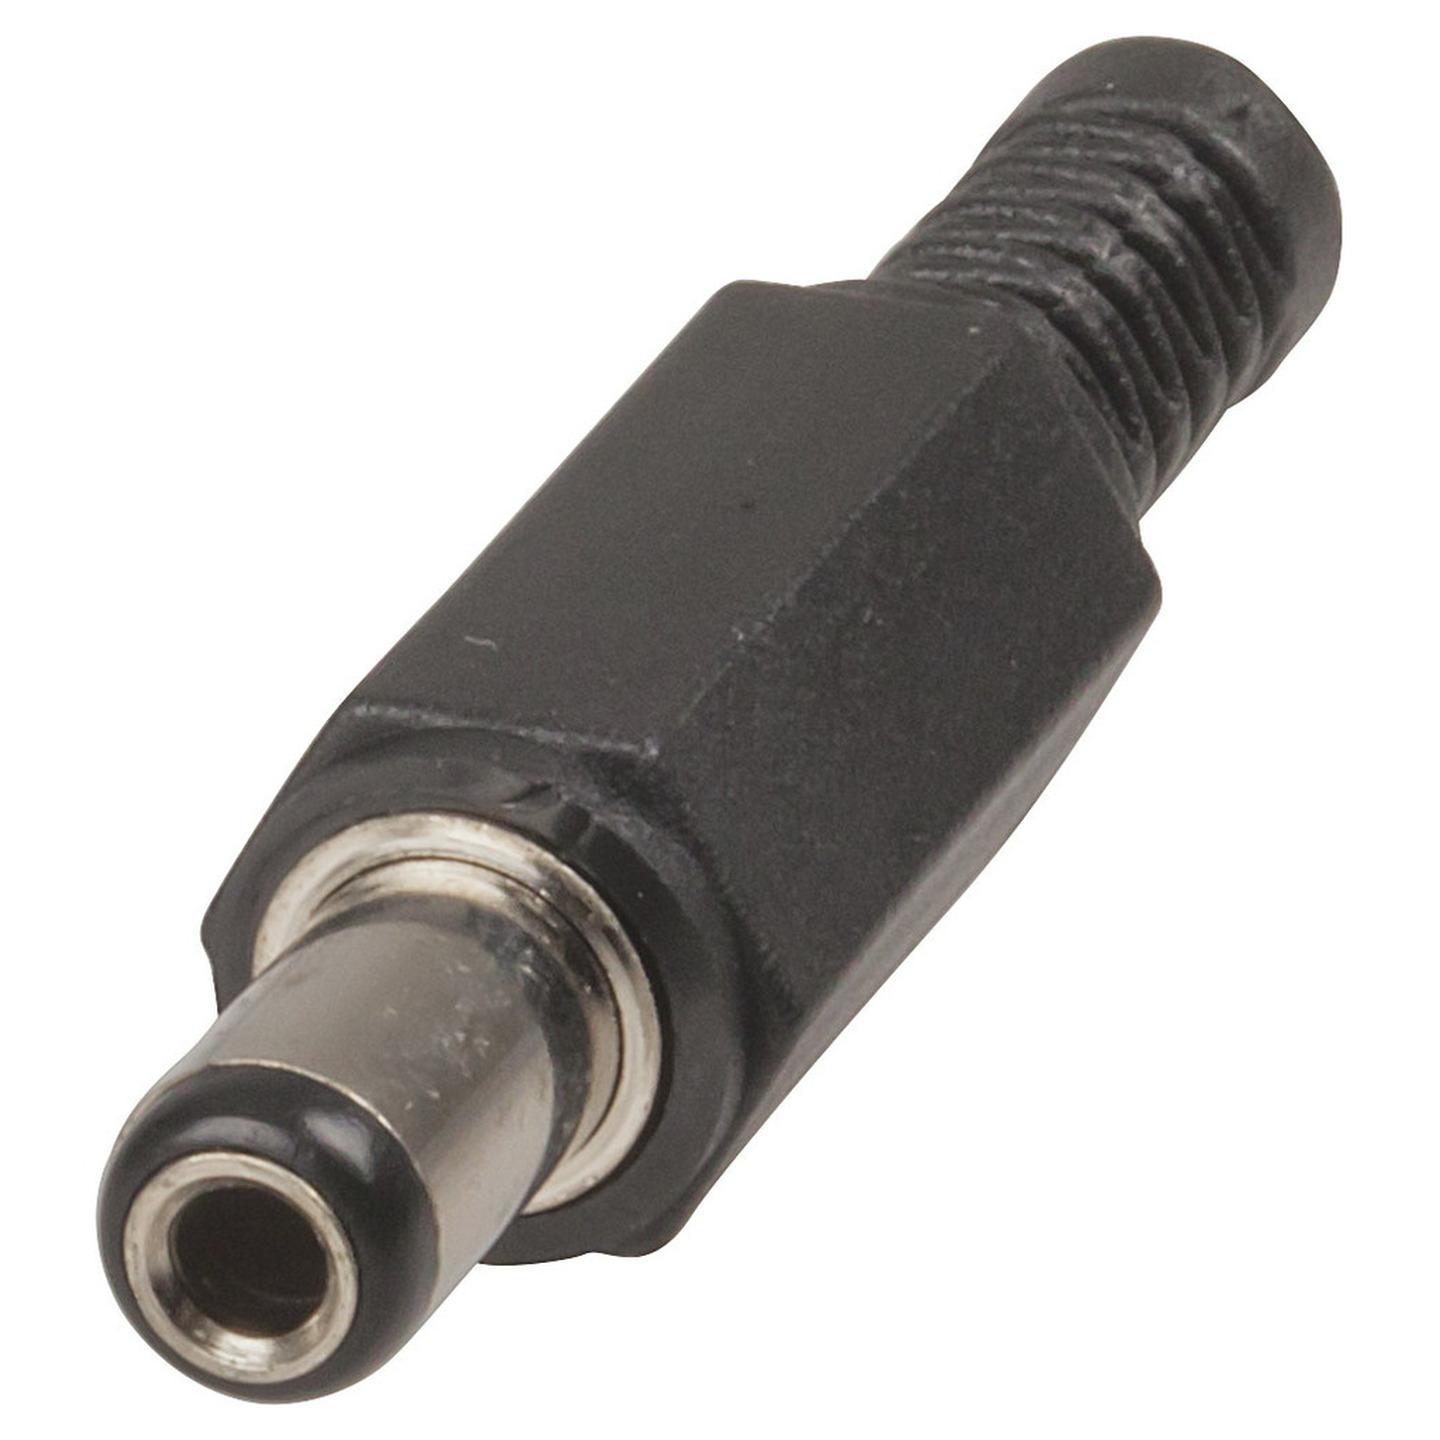 2.5mm DC Power Line Connector 10mm shaft